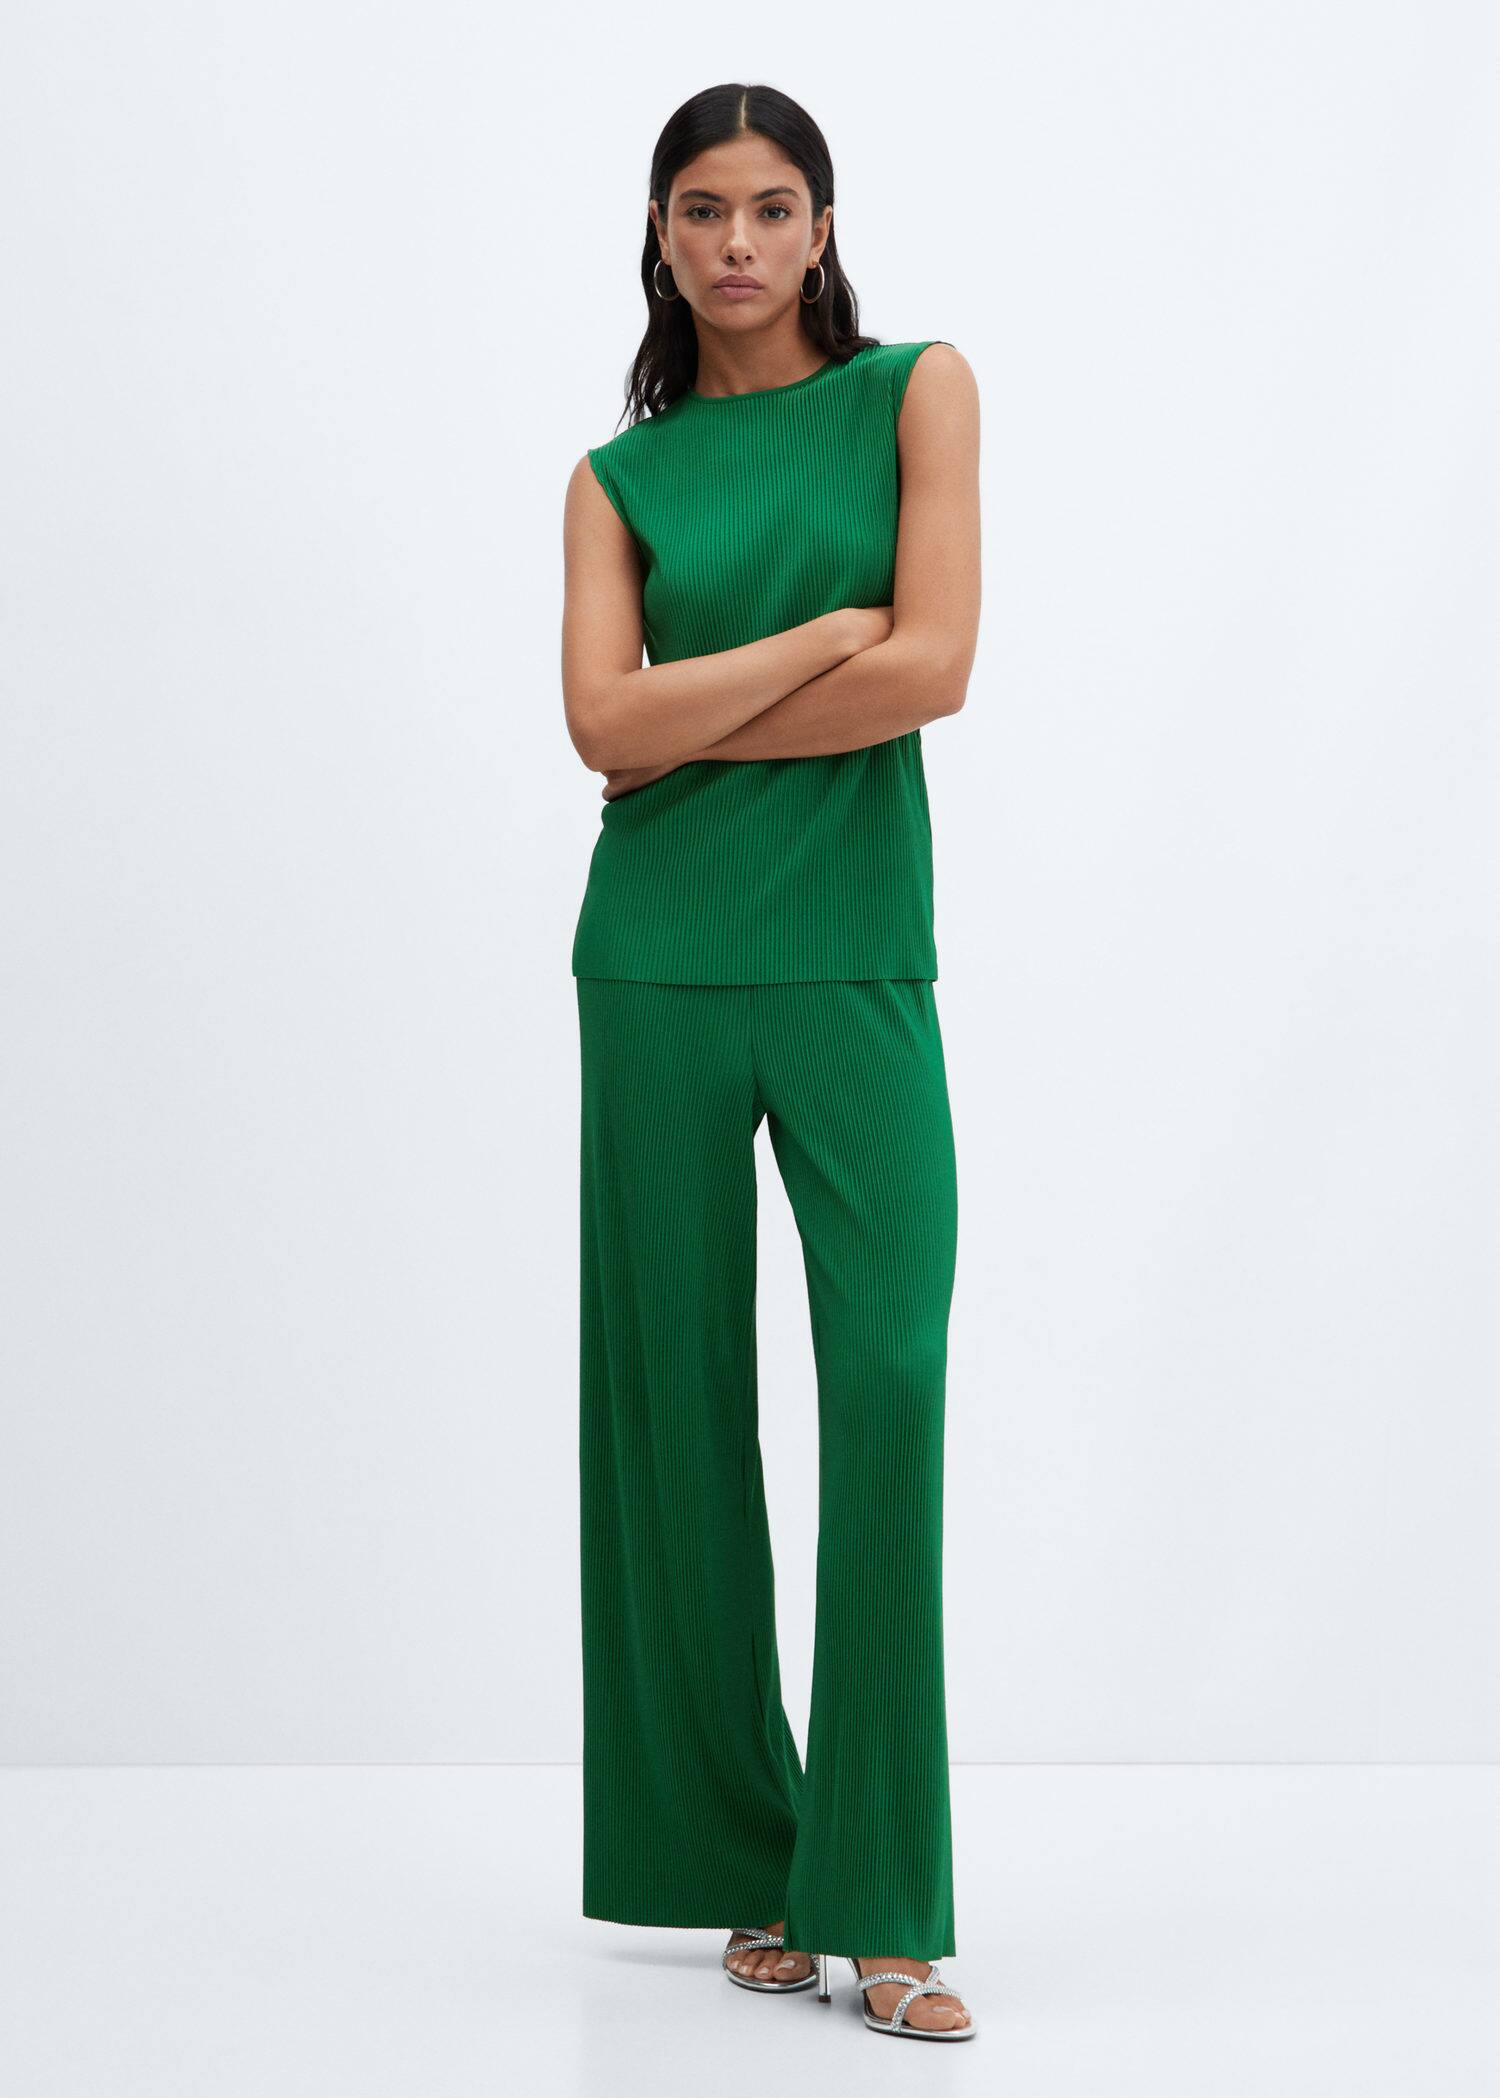 What to wear with wide leg pants: Styles you need to know | Woman & Home